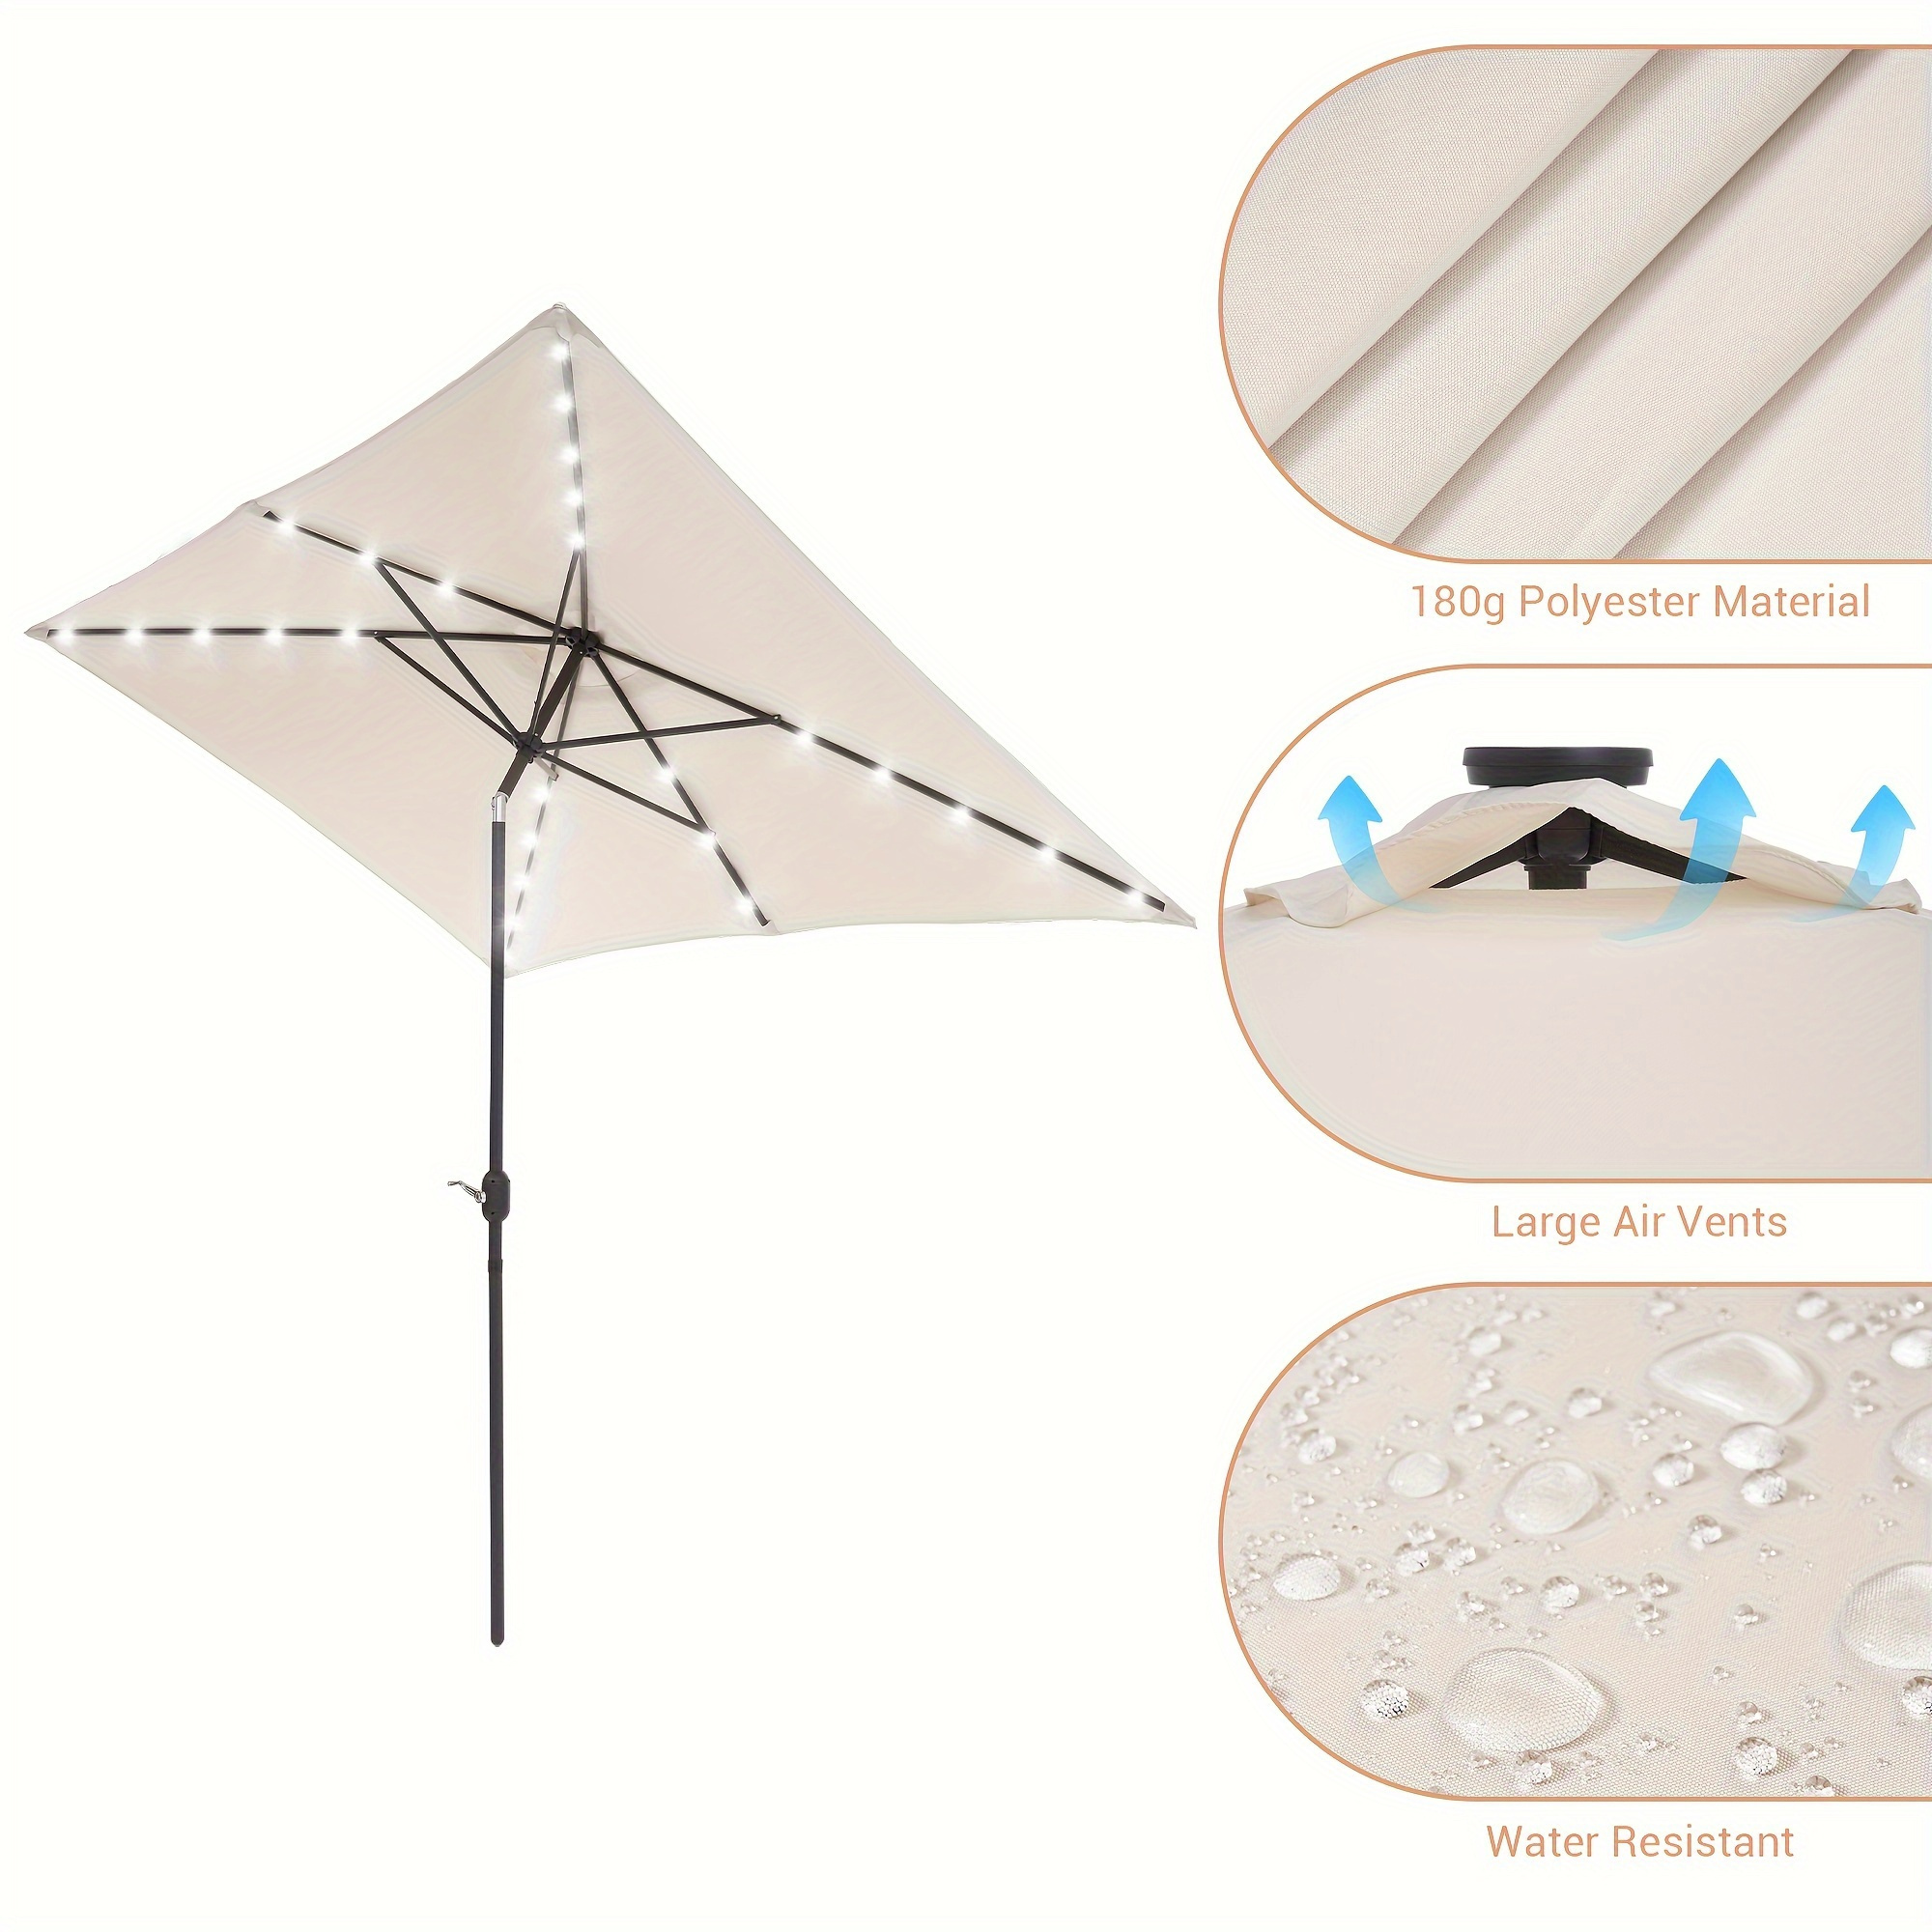 

10x 6.5ft Led Patio Market Umbrella Outdoor Weather-resistant Frame Table Umbrella For Poolside, Deck And Yard